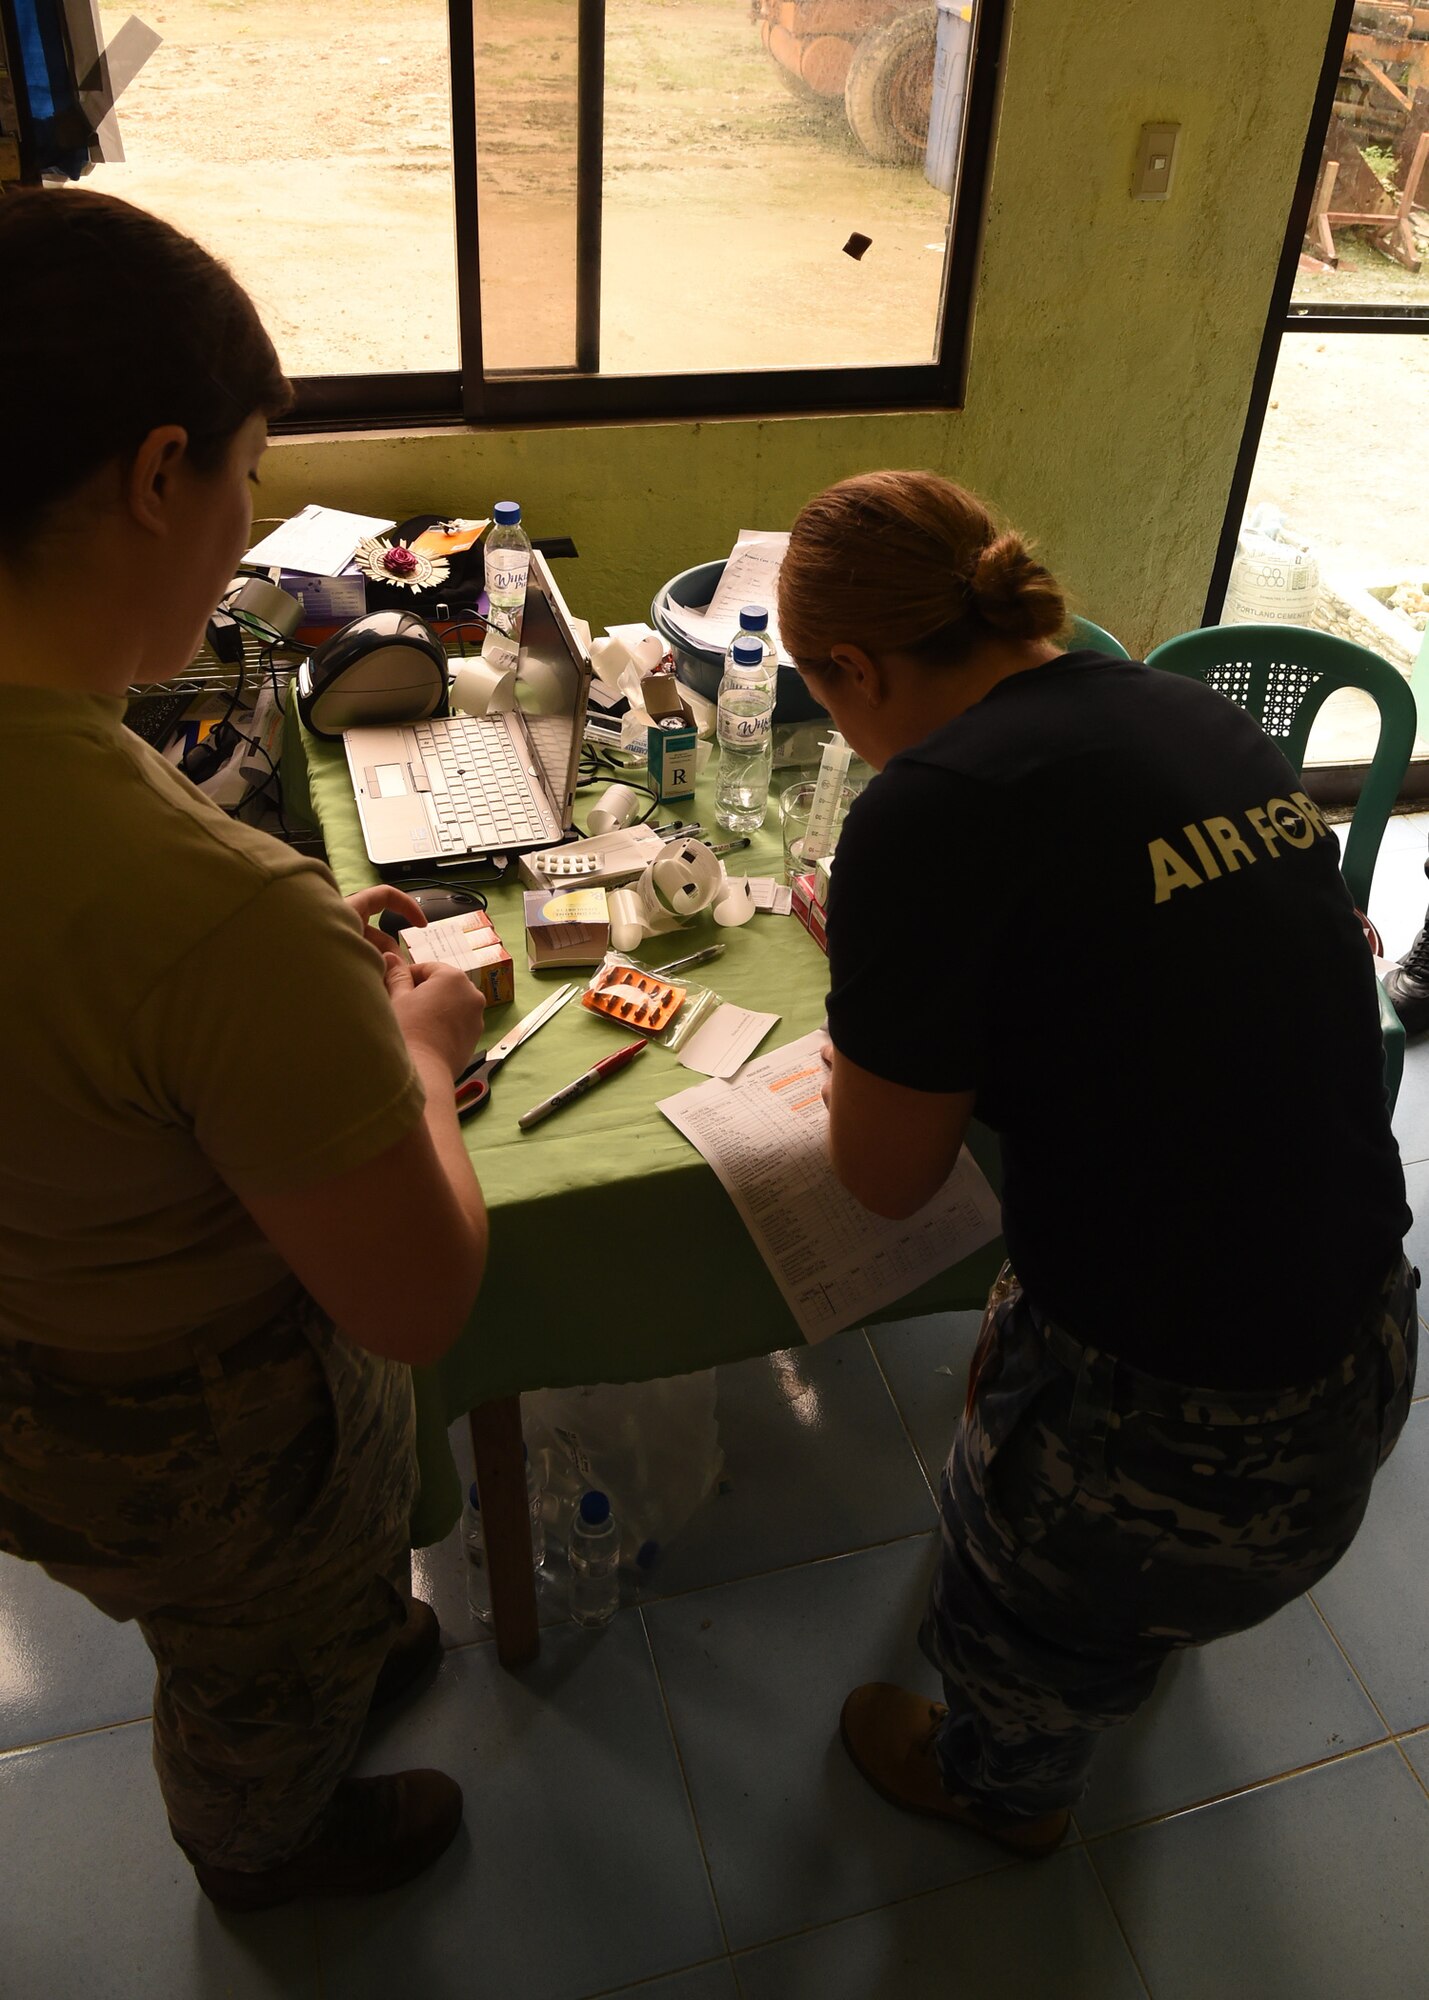 Royal Australian Air Force Flying Officer Kara Sellwood (right), a pharmacist, and U.S. Air Force Staff. Sgt Kristen Williams (left), a pharmacy technician from Andersen Air Force Base, Guam, prepare medication during the Health Services Outreach provided as part of the Pacific Angel Philippines mission taking place in Lila, Bohol province, Philippines, Aug. 16, 2015. Pacific Angel is a multilateral humanitarian assistance civil military operation, which improves military-to-military partnerships in the Pacific while also providing medical health outreach, civic engineering projects and subject matter exchanges among partner forces.(U.S. Air Force photo by Tech. Sgt. Aaron Oelrich/Released)